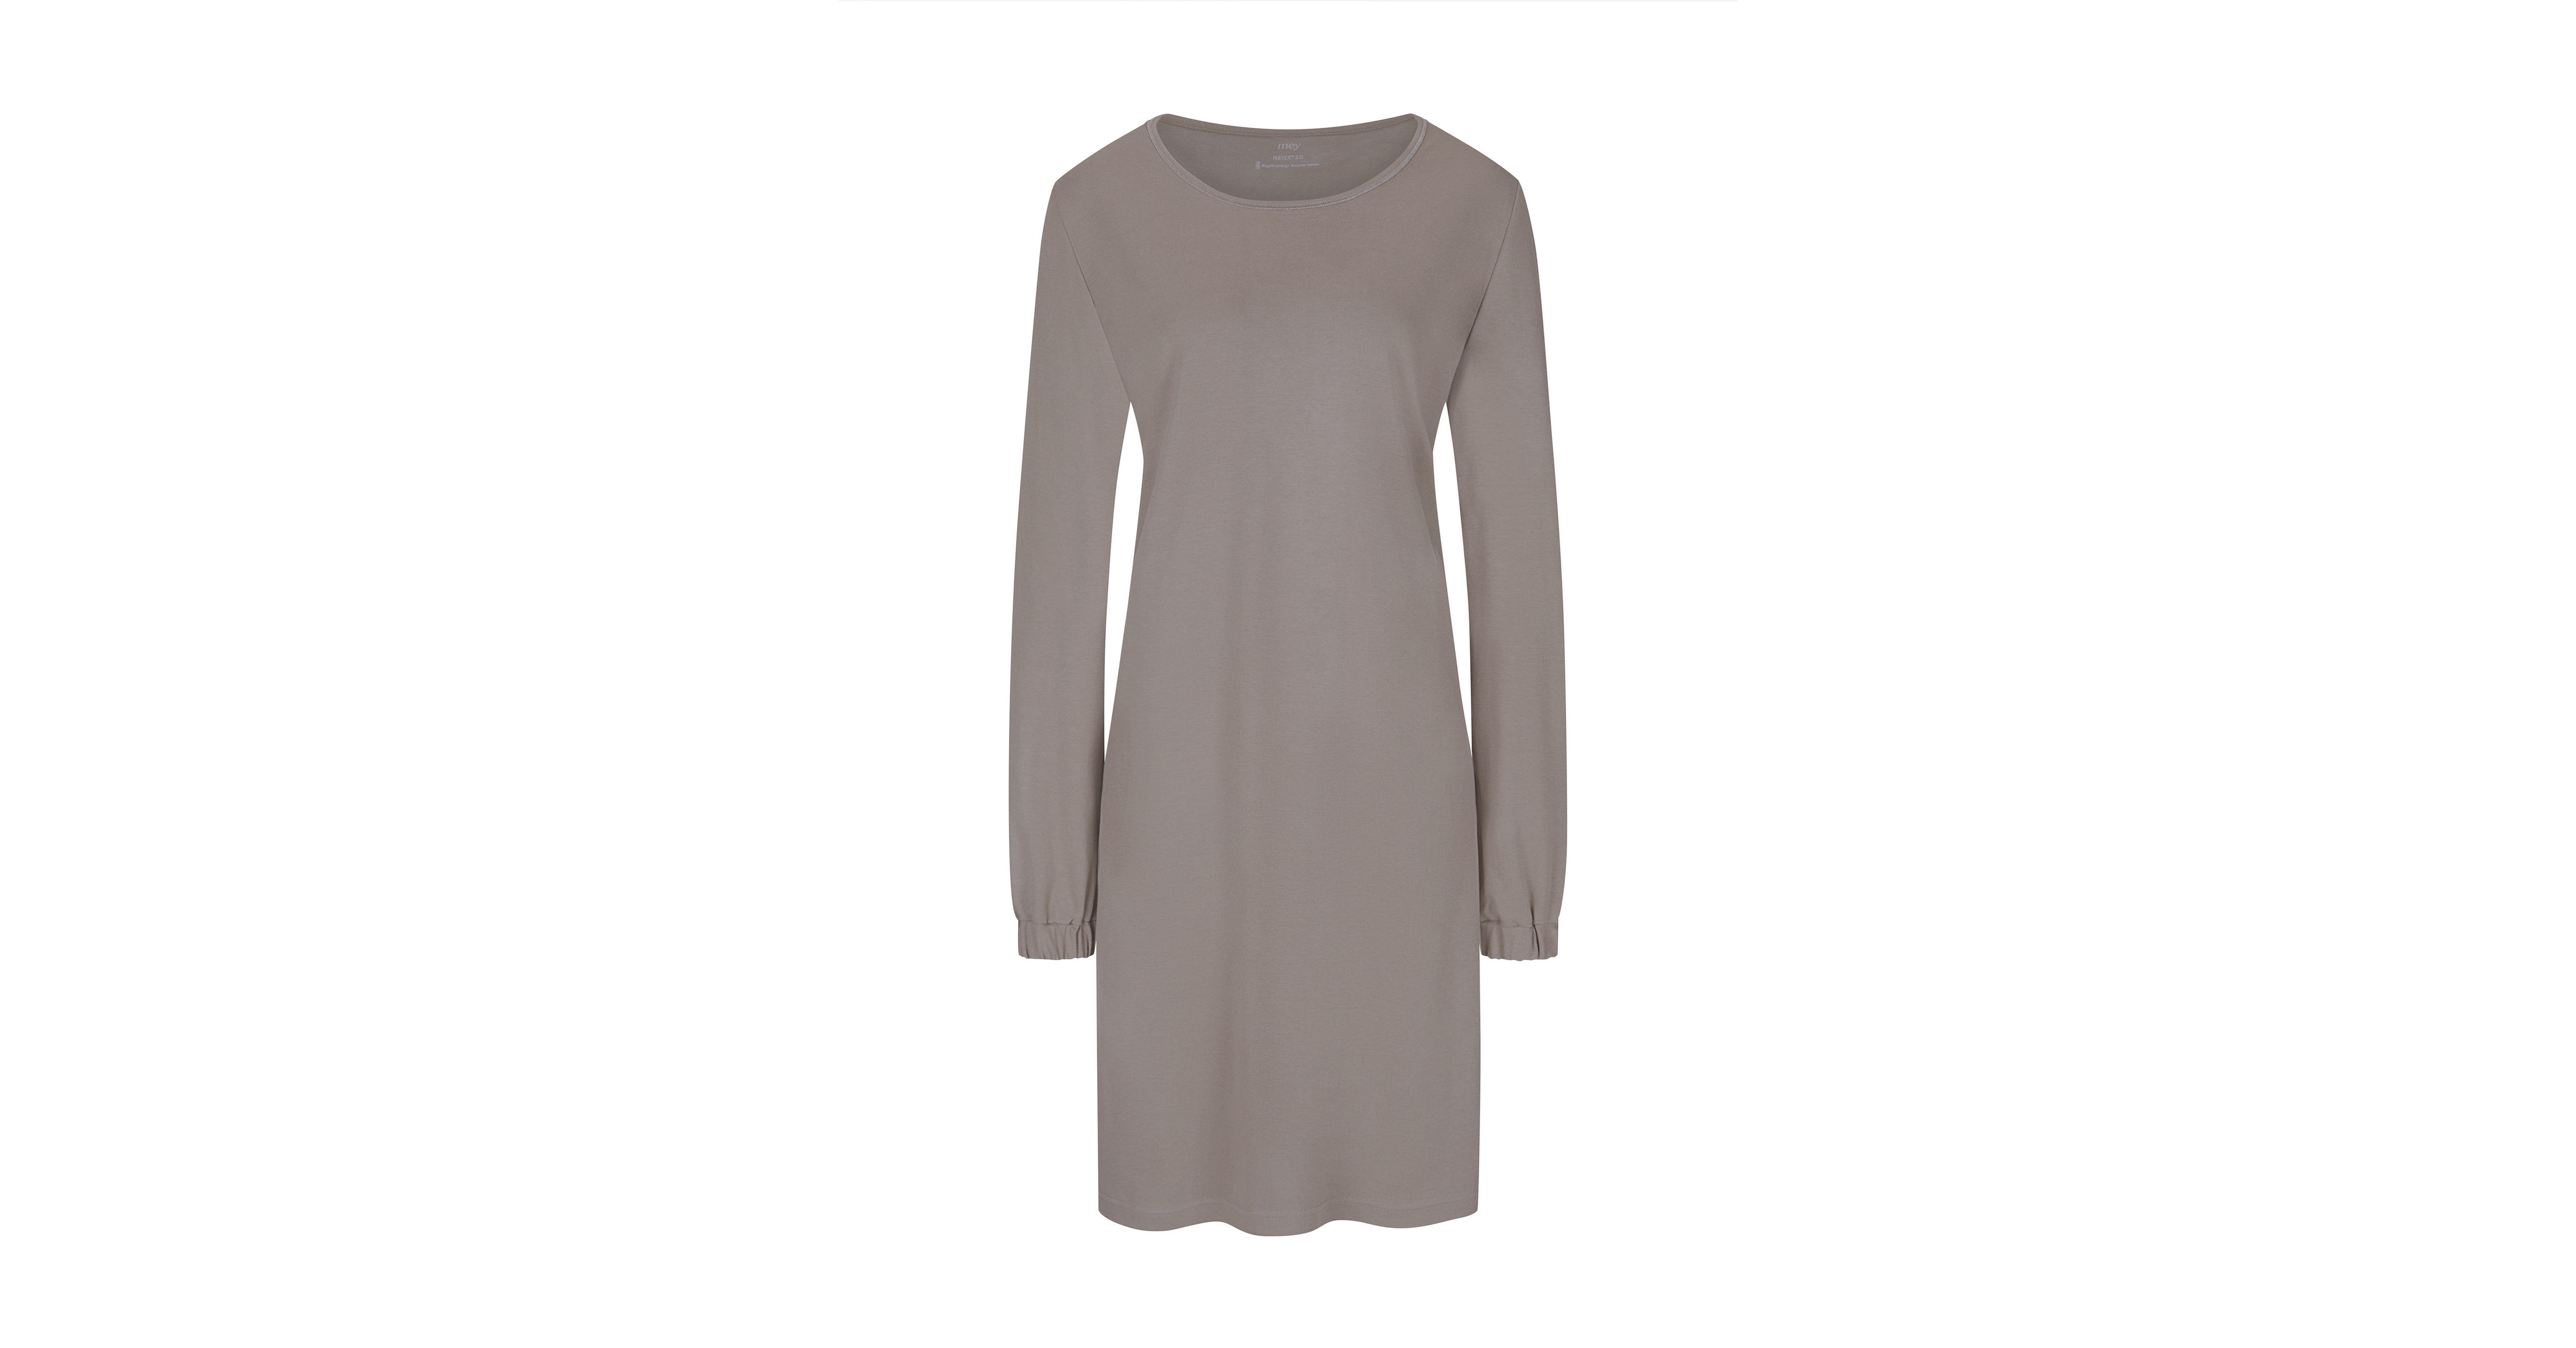 Nature-based CELLIANT® Viscose powers the Zzzleepwear Series from mey -  CELLIANT